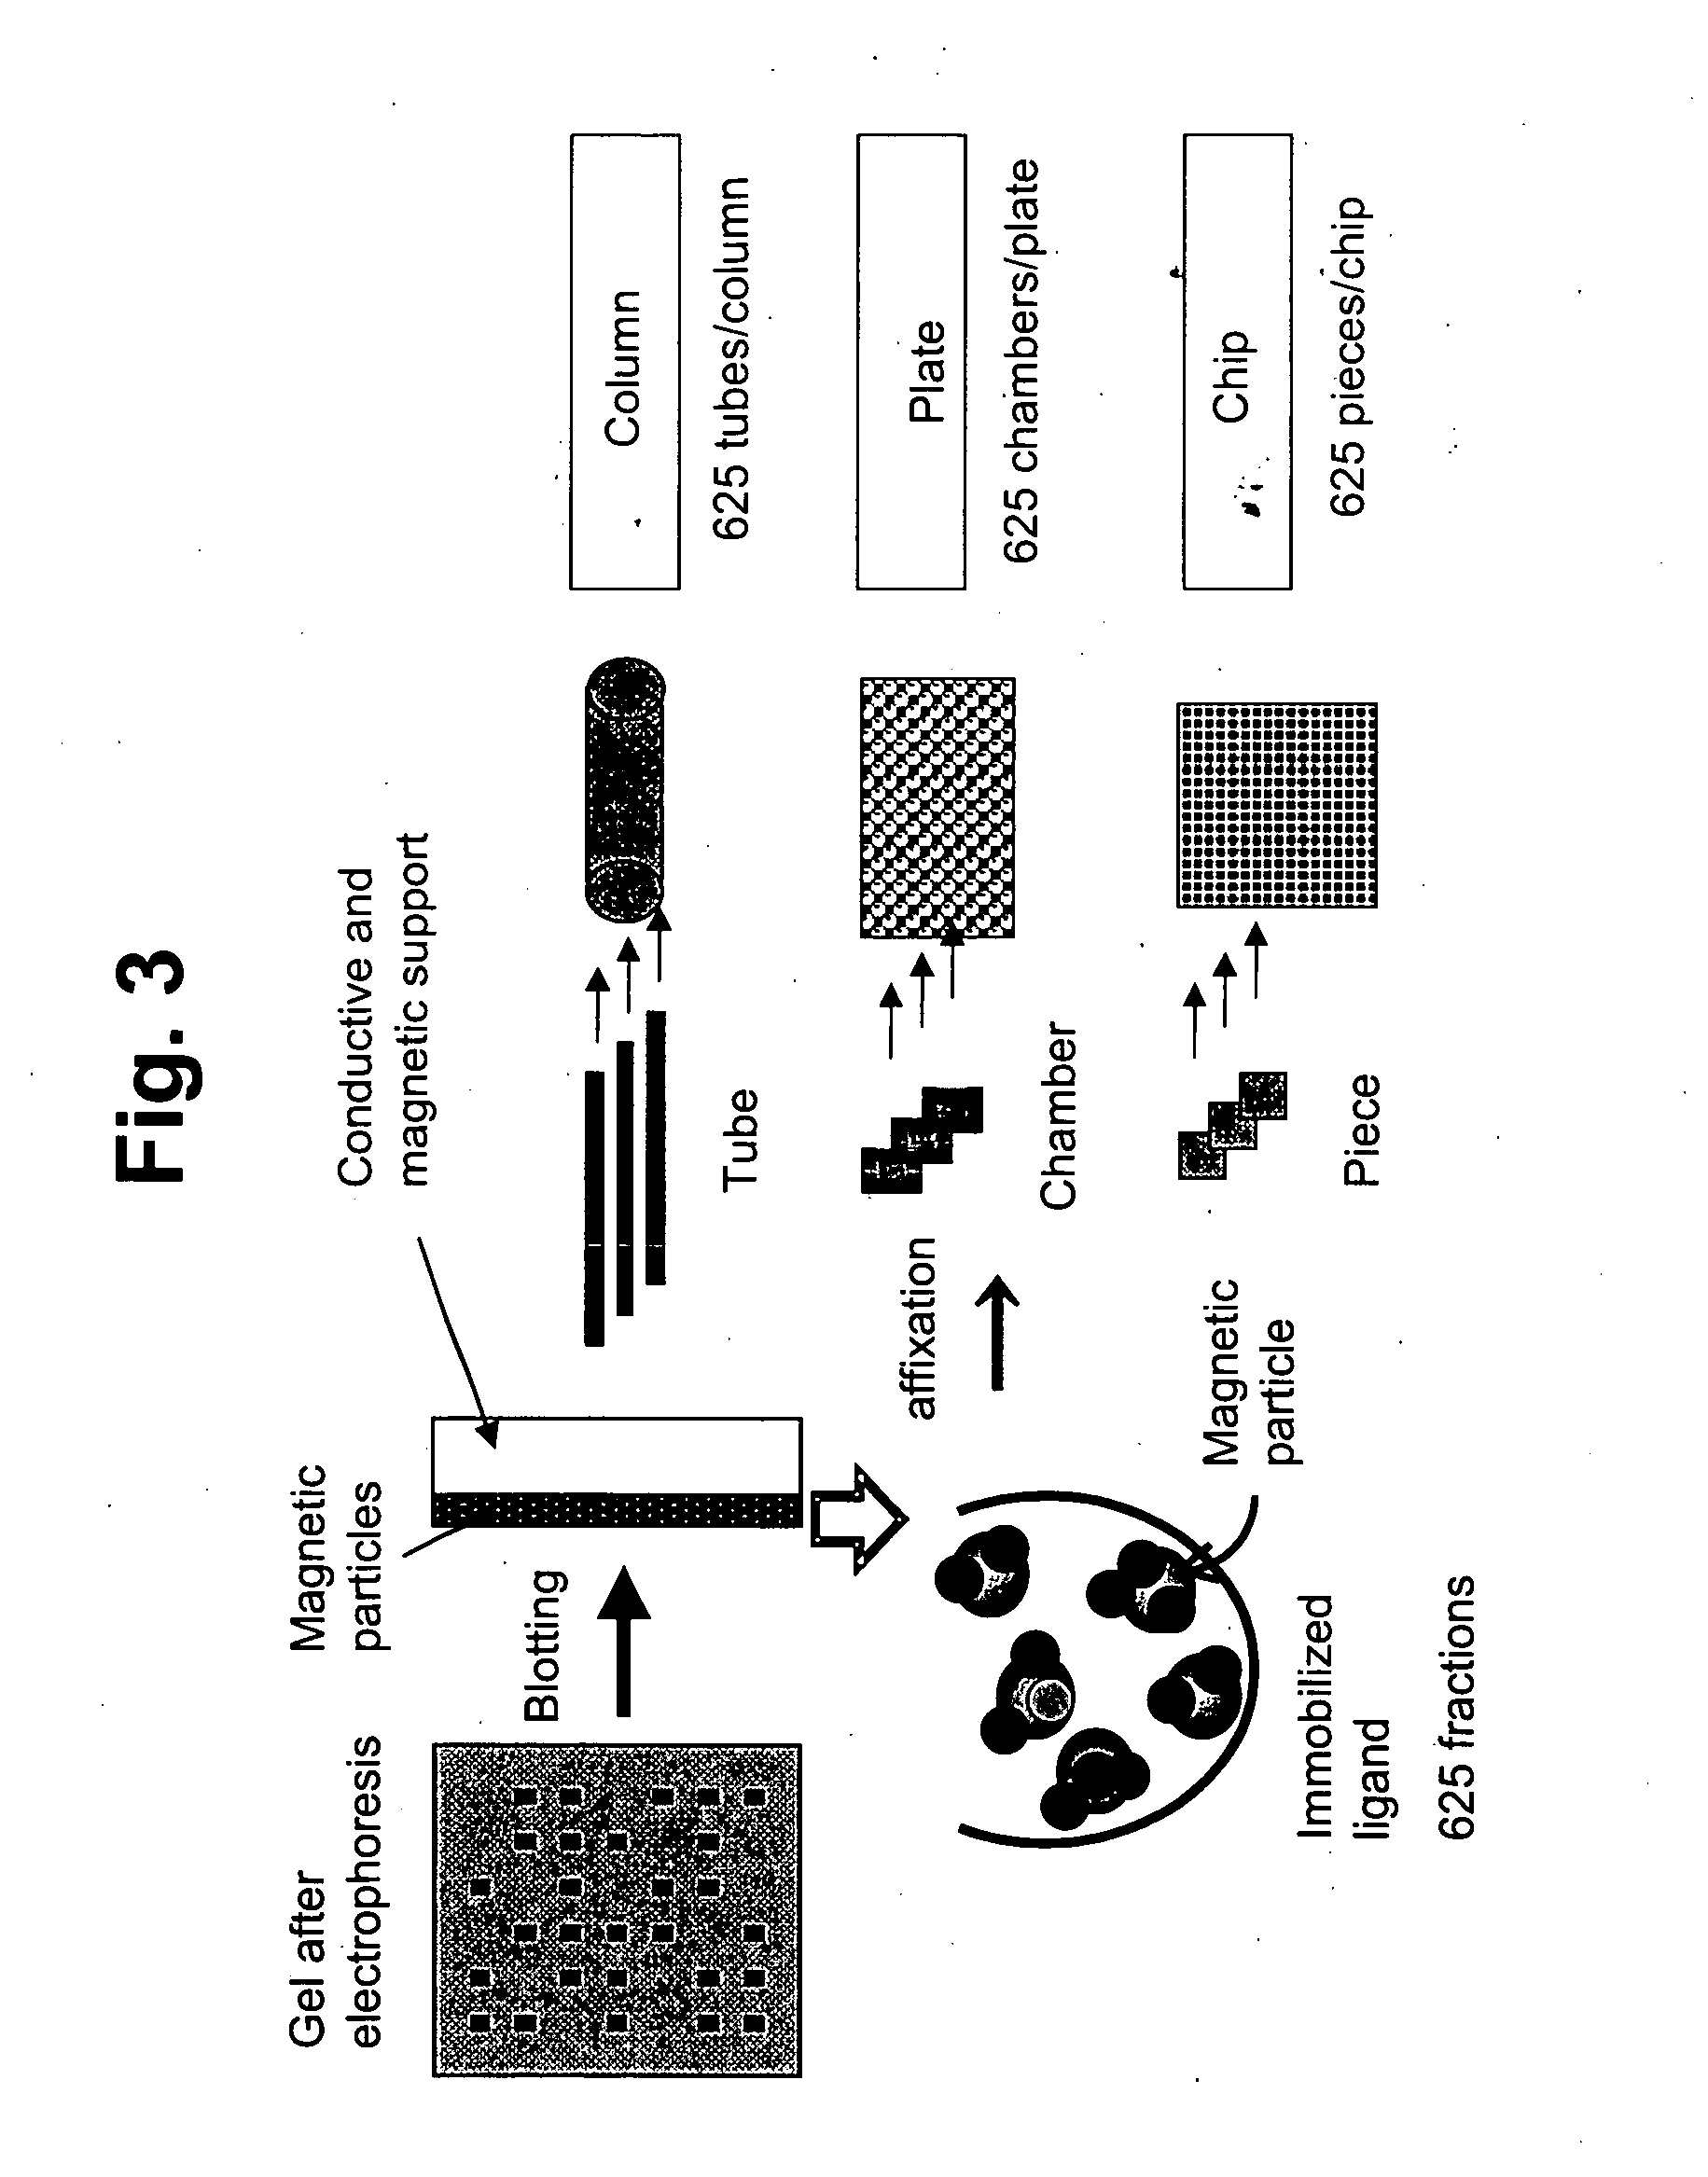 Membrane protein library for proteome analysis and method for preparing same